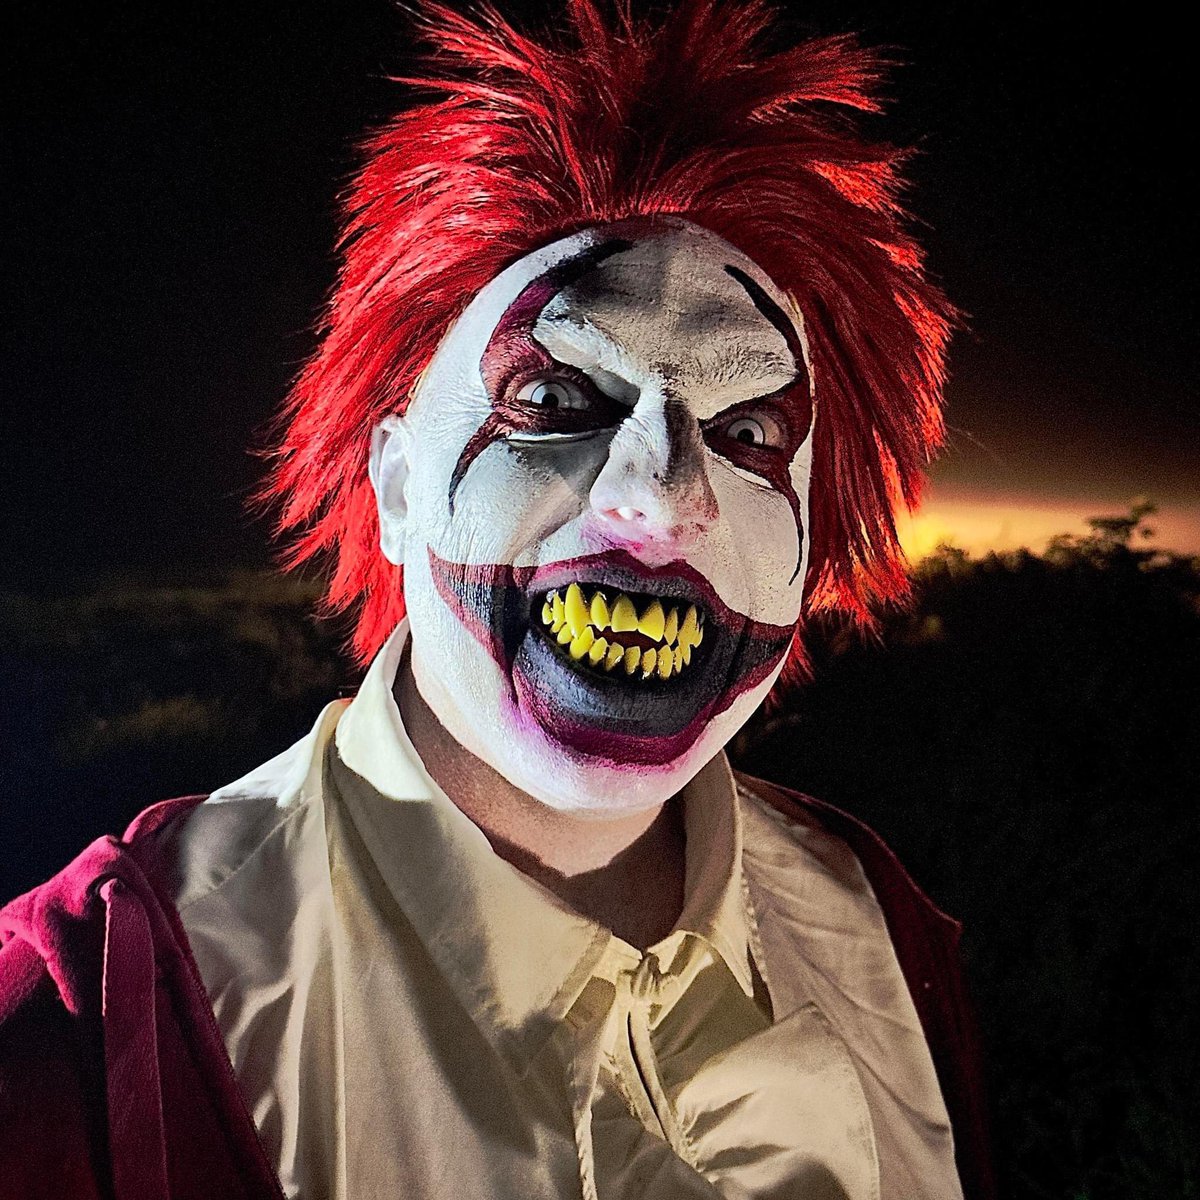 Watch the Necroland series trailer at: youtu.be/f8G4w8Hm7Xs?si…

Sign up at the Necroland community at: Patreon / NecrolandTV

#indiefilm #scifi #horror #patreon #crowdfunding #gofundme #clown #clowns #evilclowns #cosplay #makeup #guttertheclown